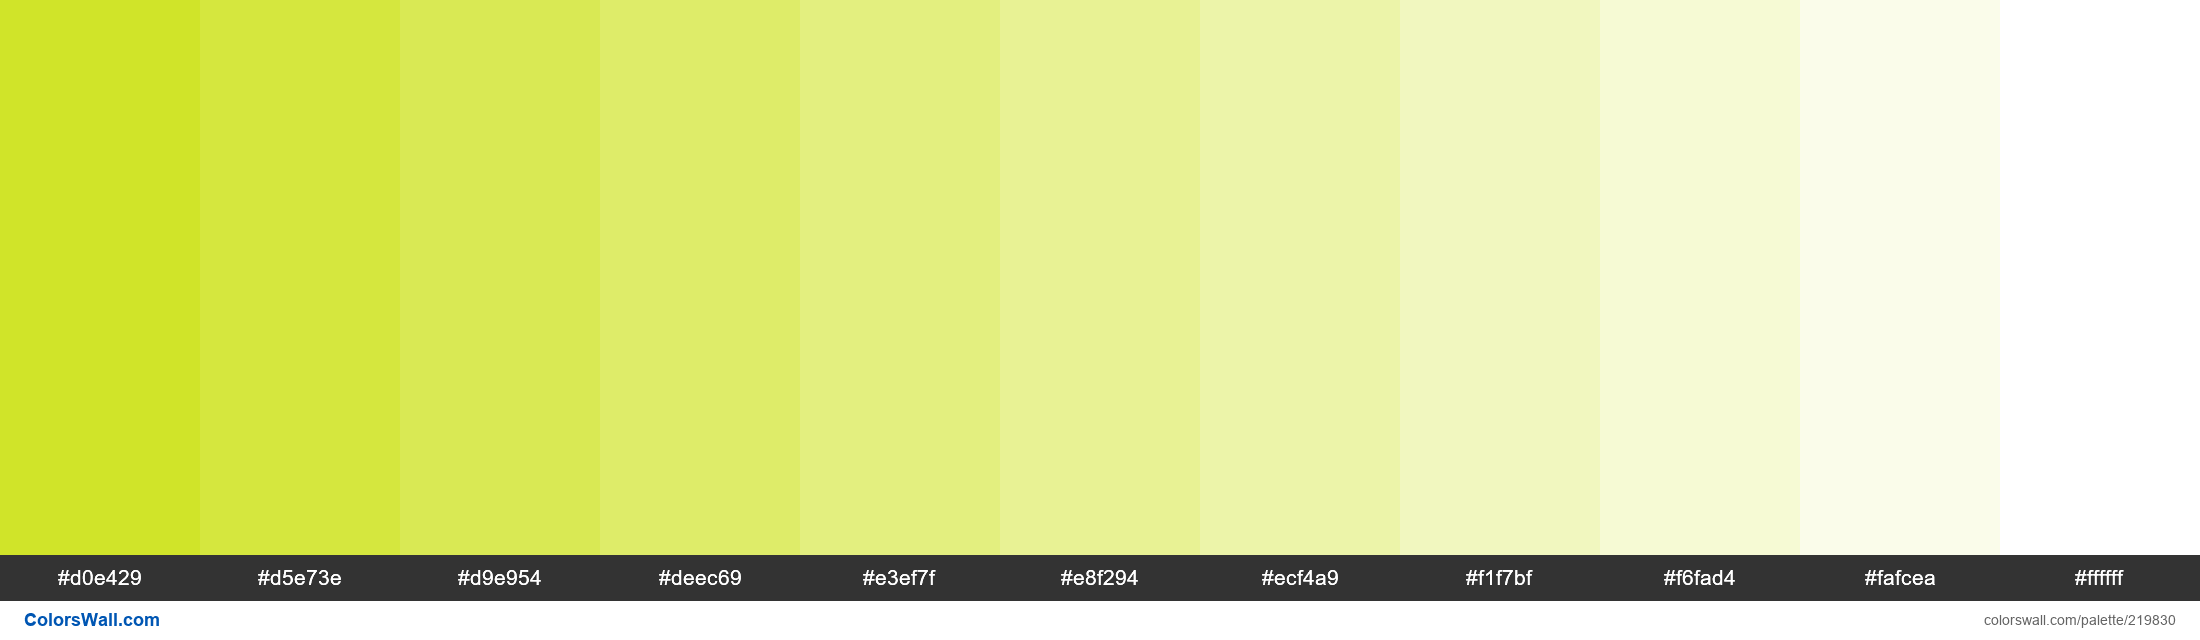 Sickly Yellow colors palette ColorsWall